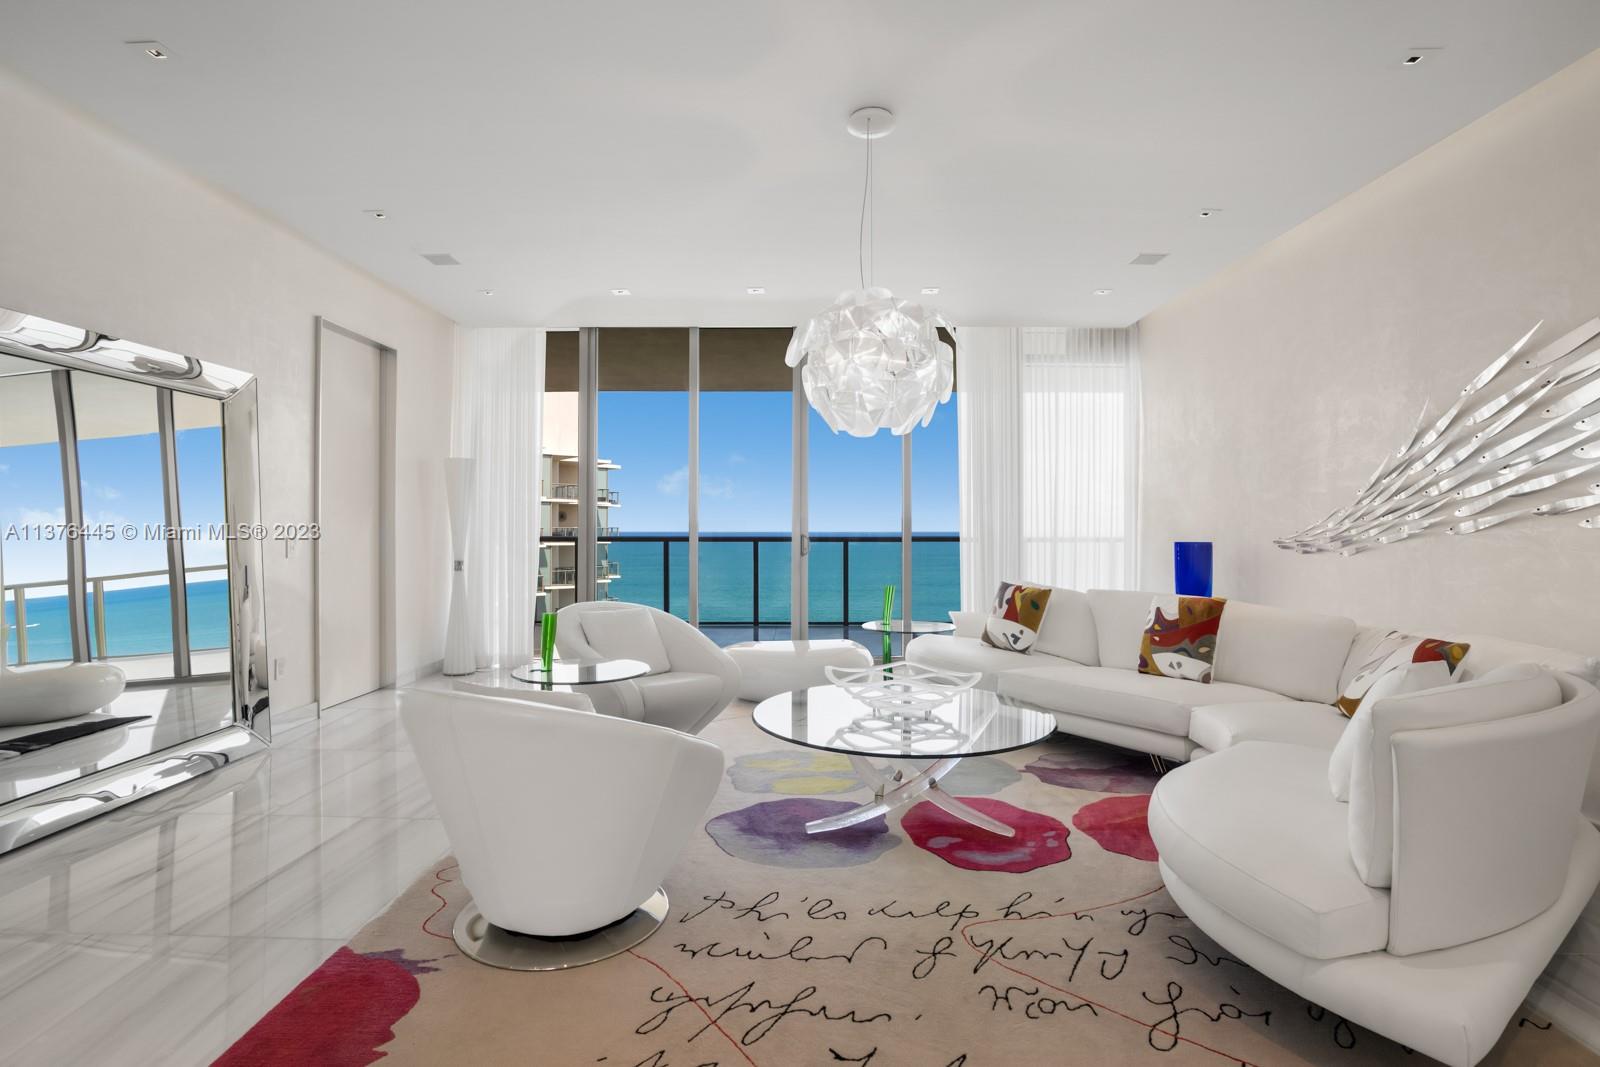 Introducing the Lower Penthouse at the highly sought after St. Regis Bal Harbour. This stunning unit offers breathtaking panoramic ocean views, with floor-to-ceiling windows that flood the space with natural light. Experience an open floor plan that seamlessly blends indoor & outdoor living. The fully equipped kitchen is complete with top-of-the-line appliances, custom cabinetry, & a large island. The adjacent dining area offers plenty of space to gather & take in the breathtaking Miami skyline. Residents can enjoy unparalleled amenities, including a spa, fitness center, pool, beach services, & 24-hour concierge & security. Just seconds away from the prestigious Bal Harbour Shops, this unit offers a luxurious lifestyle that is second to none.